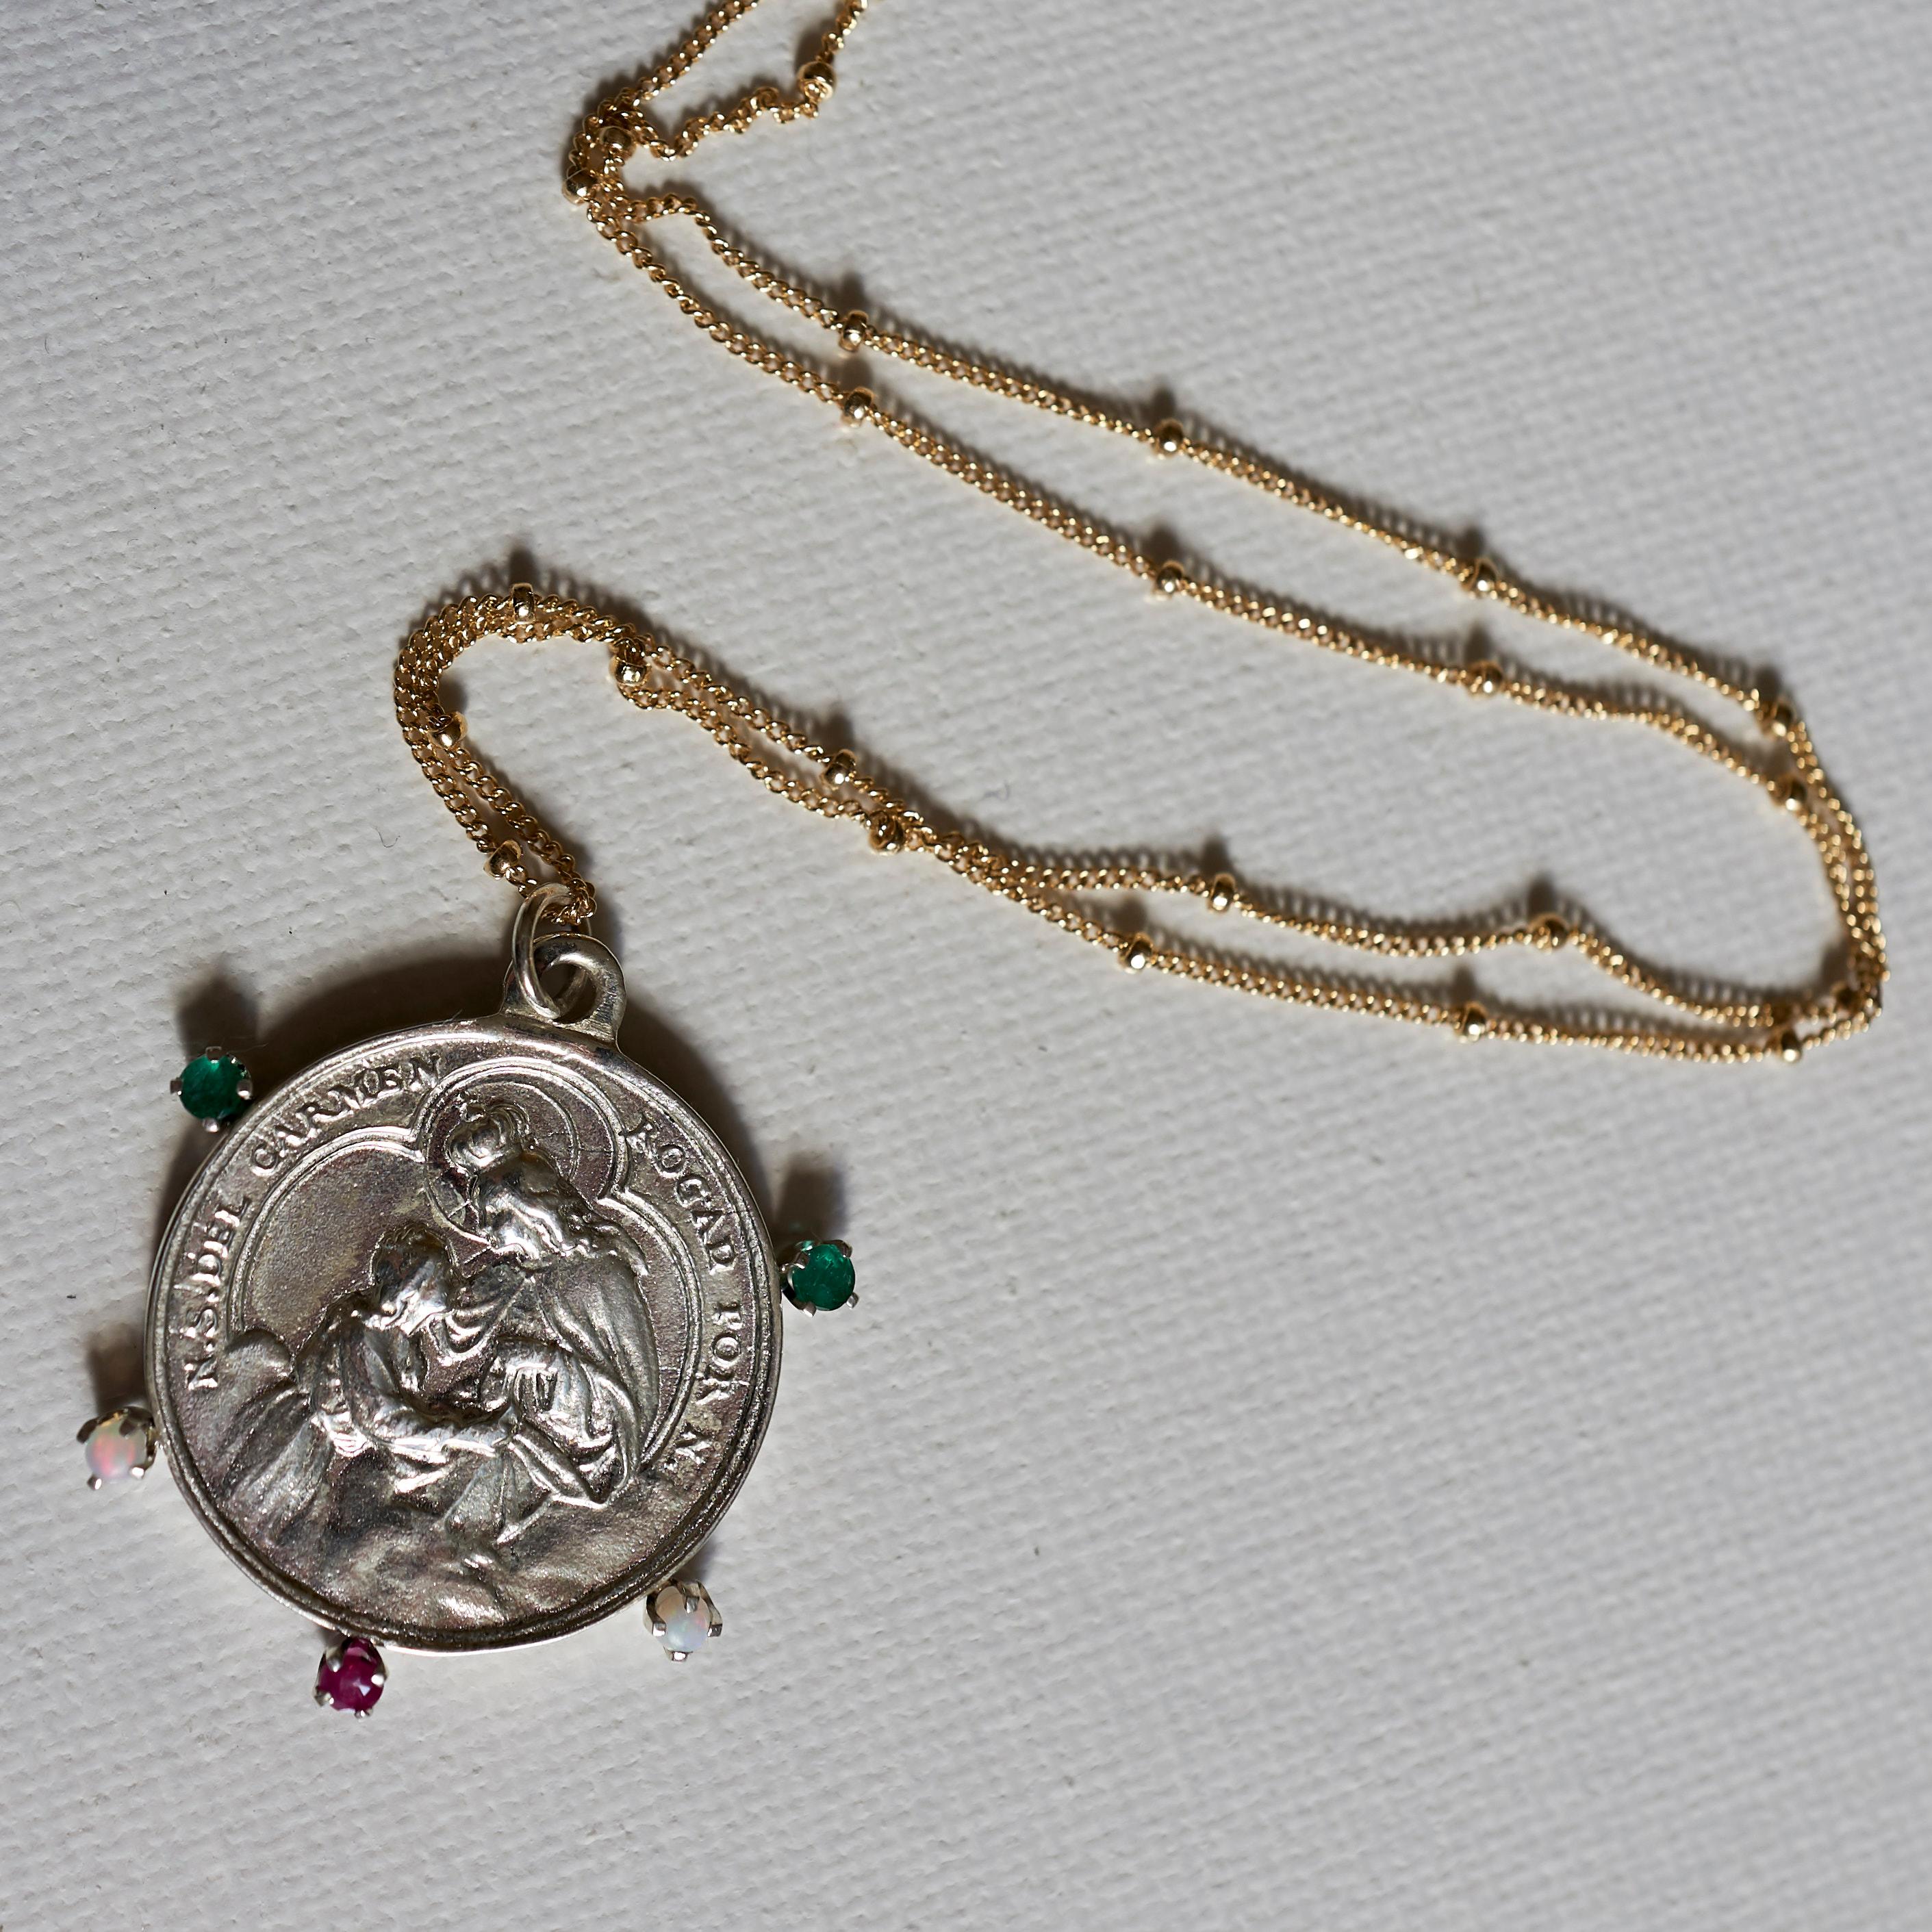 Contemporary Emerald Ruby Opal Virgin Mary Medal Necklace Silver Pendant Gold Filled Chain J For Sale